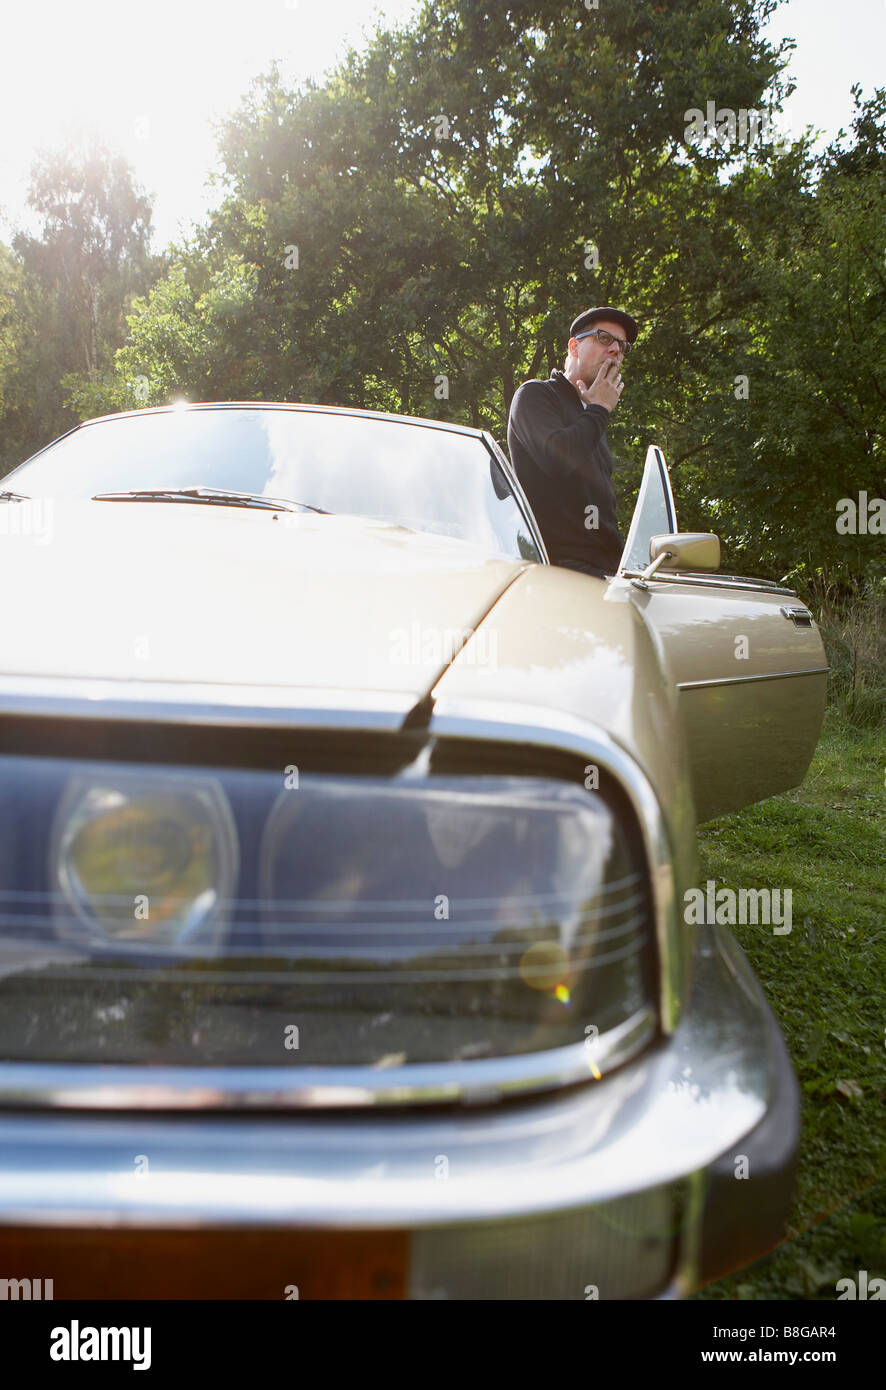 man in black clothes smoking a cigarette next to a vintage car in the countryside Stock Photo